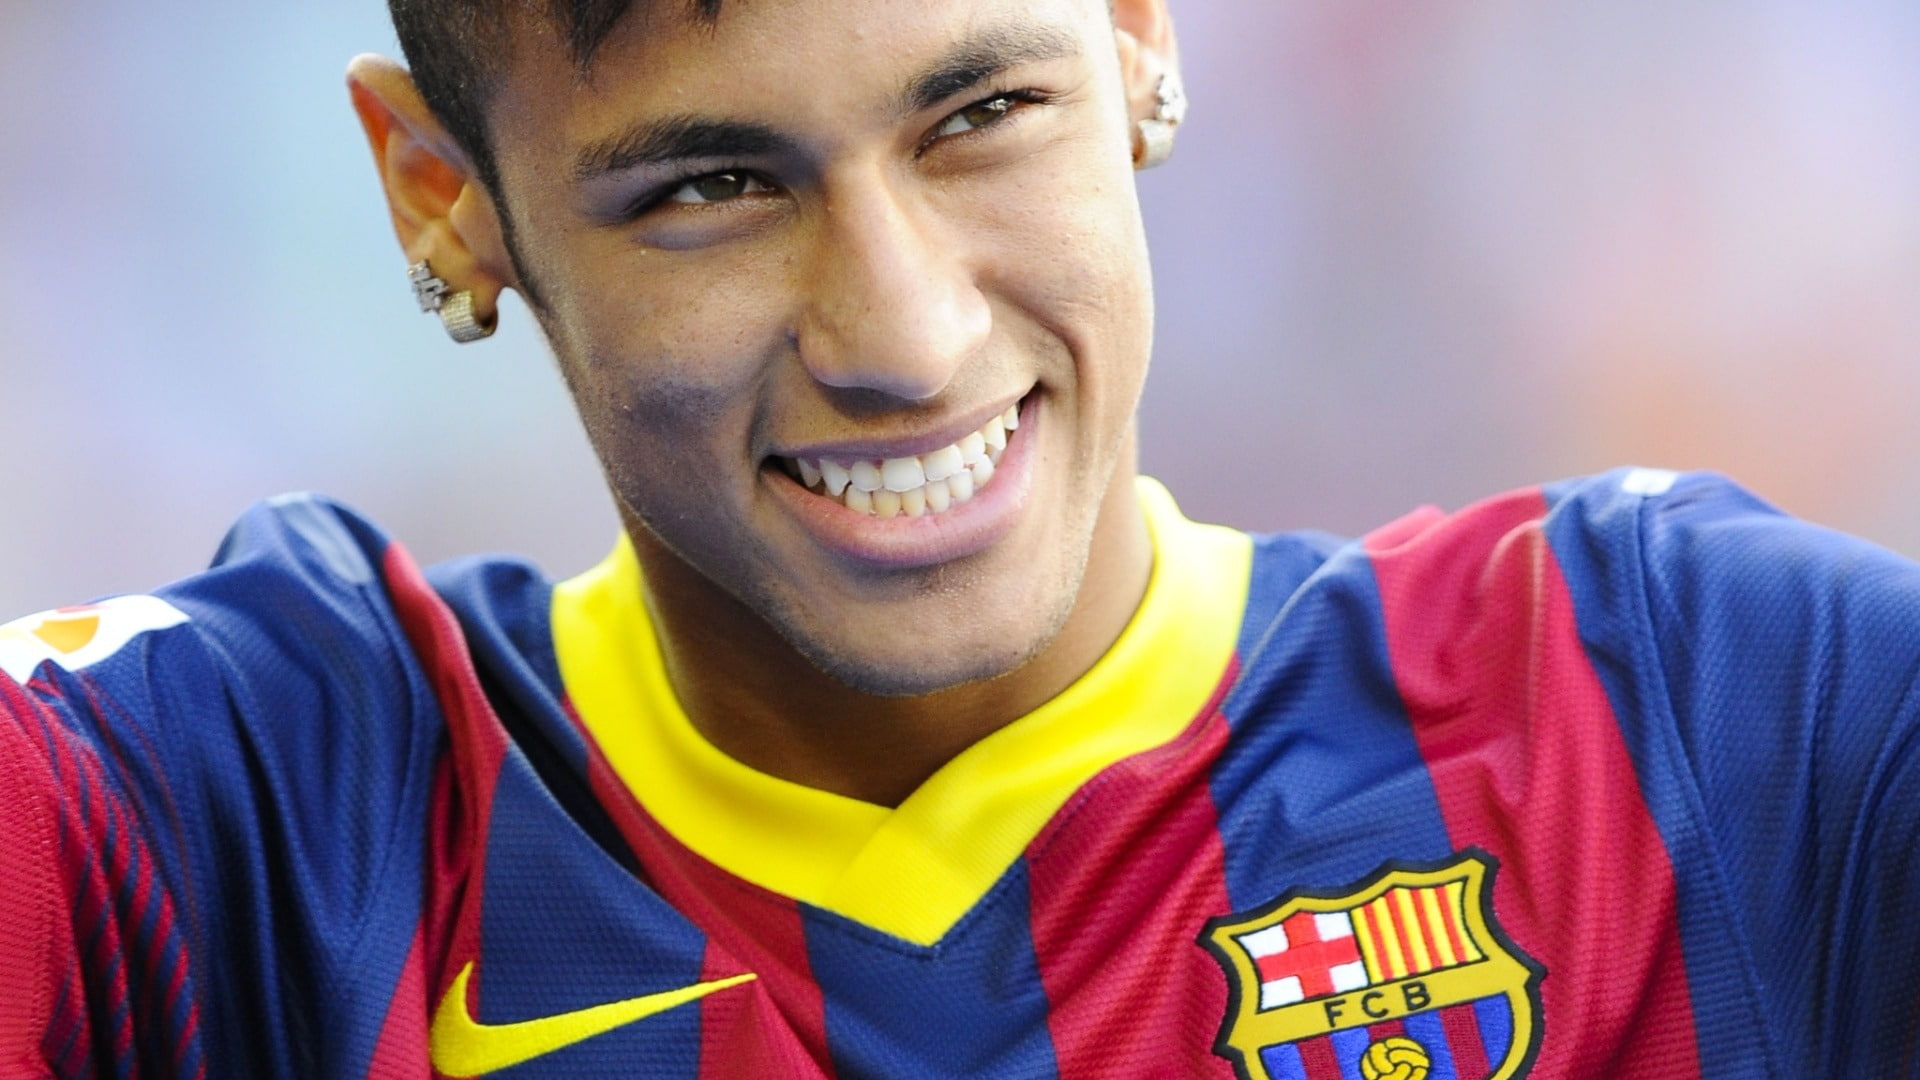 Wallpaper / Wallpaper, Fifa, Happiness, Clothing, Jr, Looking, Neymar, Portrait, Casual Clothing, Lifestyles, Young Adult, Looking At Camera, Young Men, Emotion, Close Up Free Download